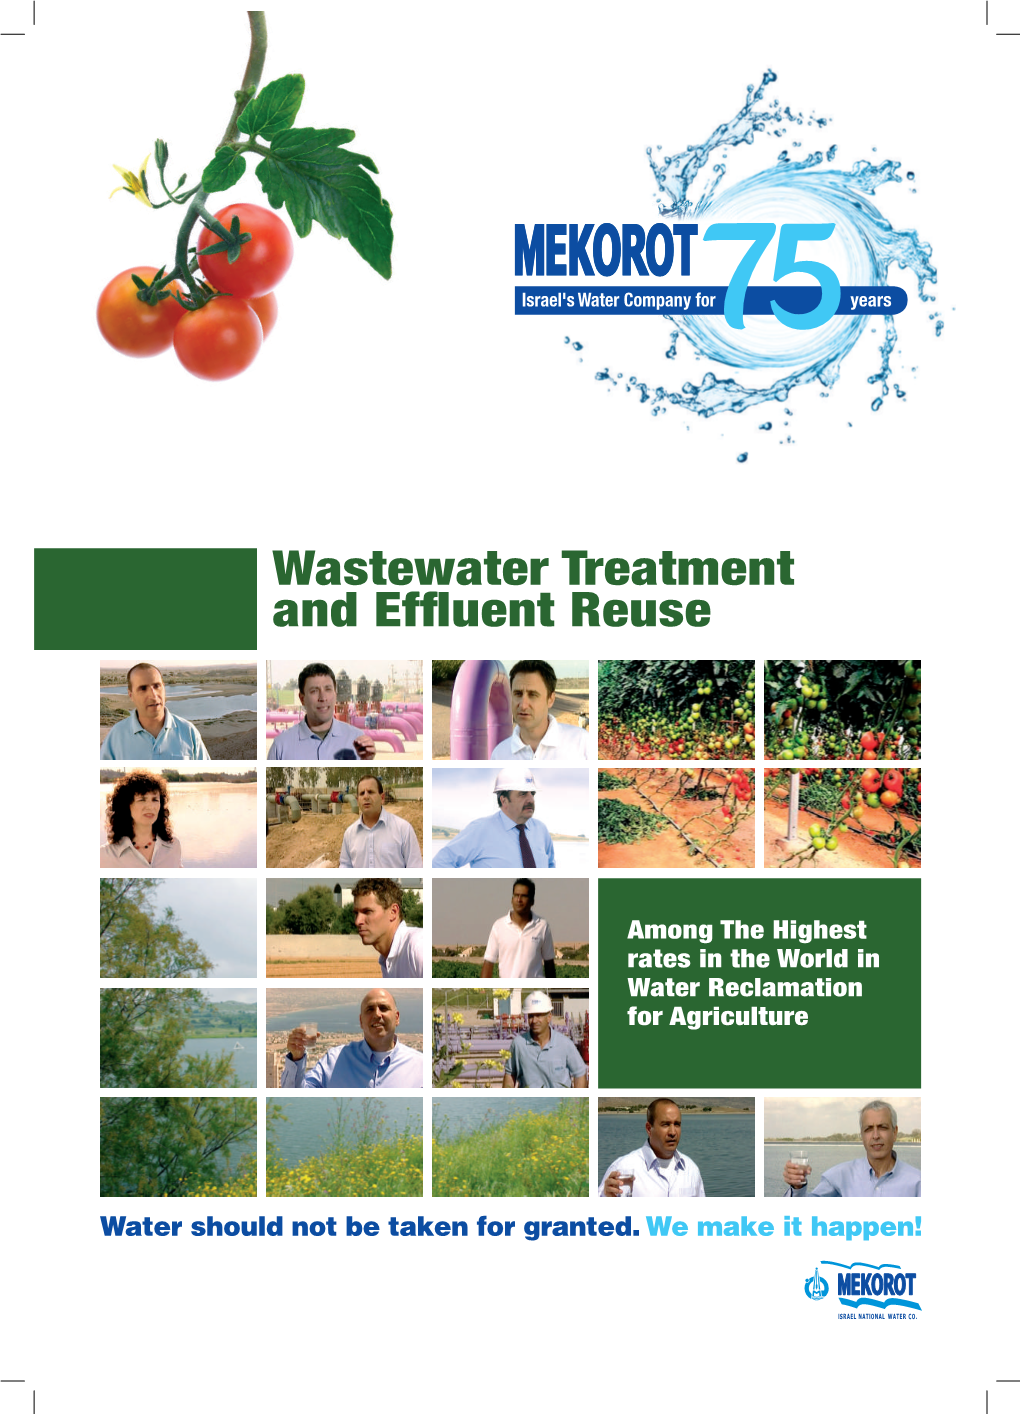 Wastewater Treatment and Effluent Reuse